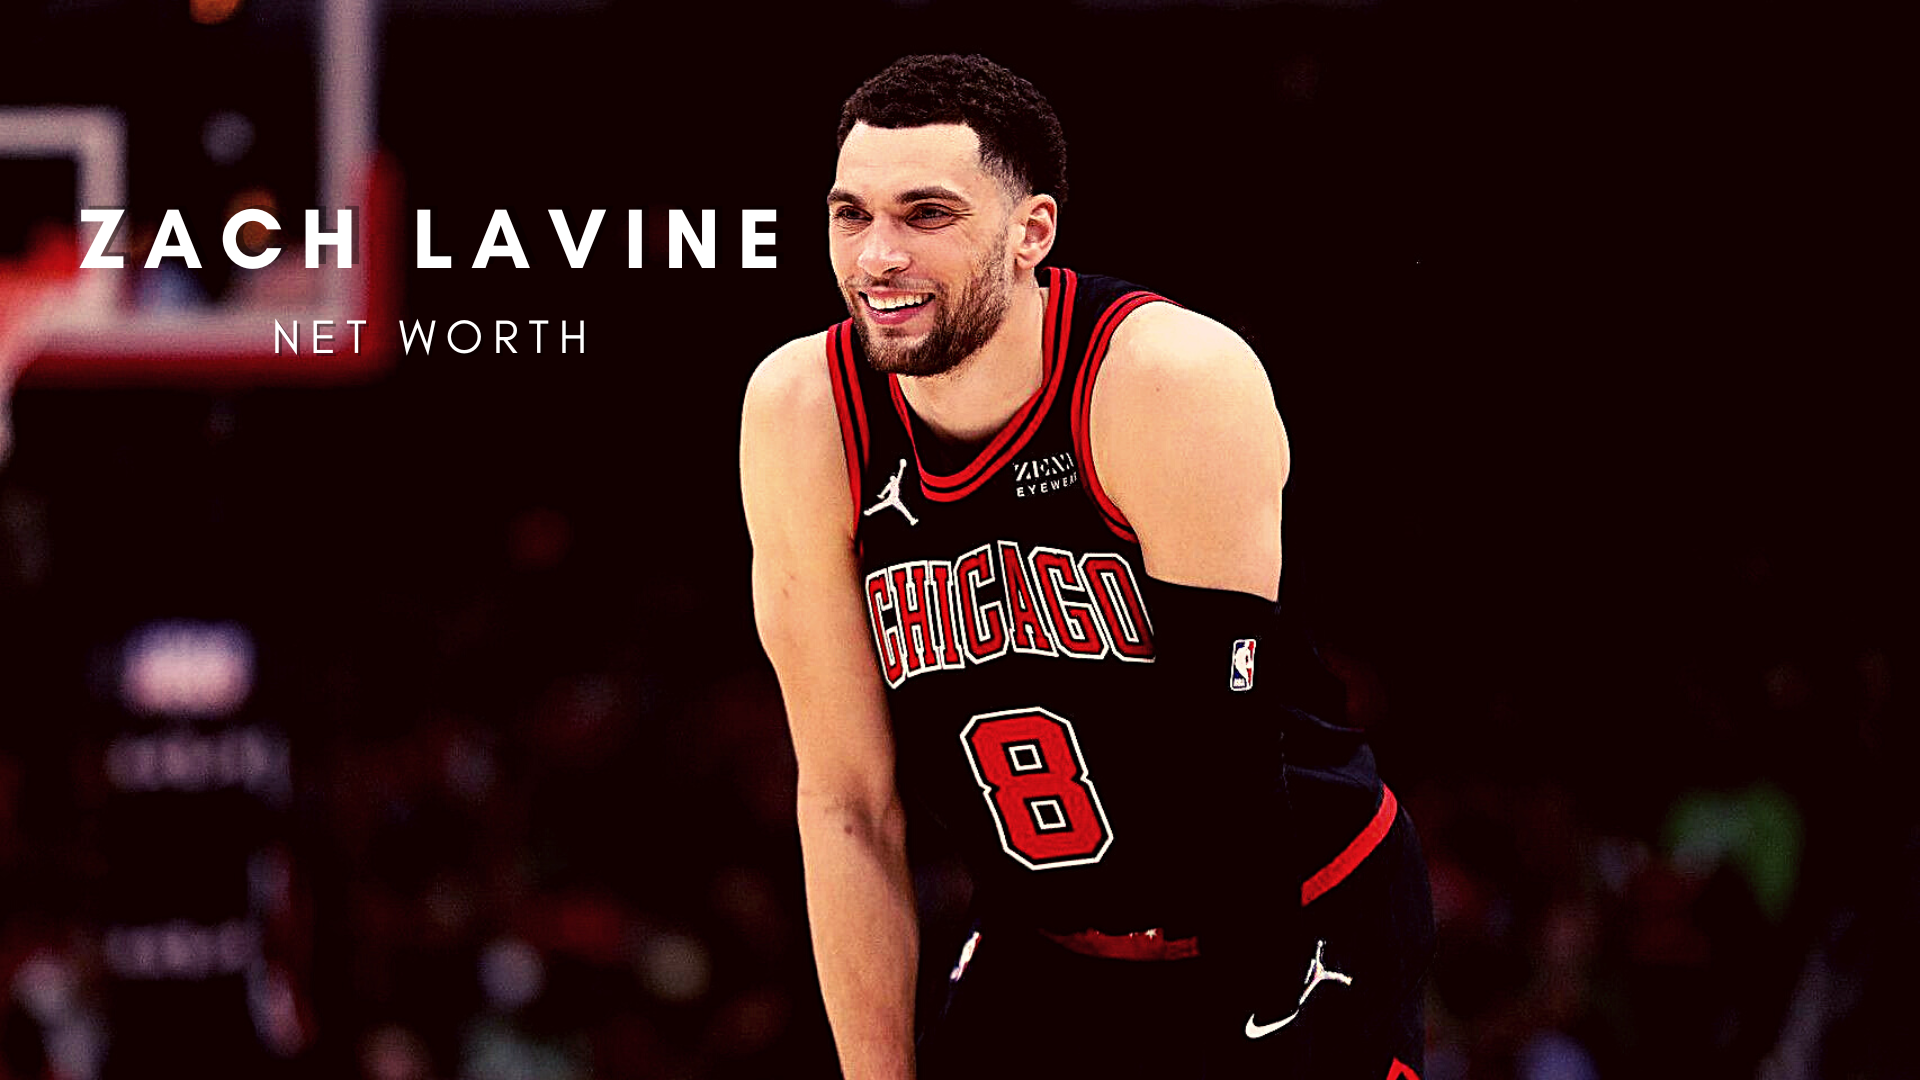 Zach LaVine 2022 Net Worth, Salary, Records, and Endorsements